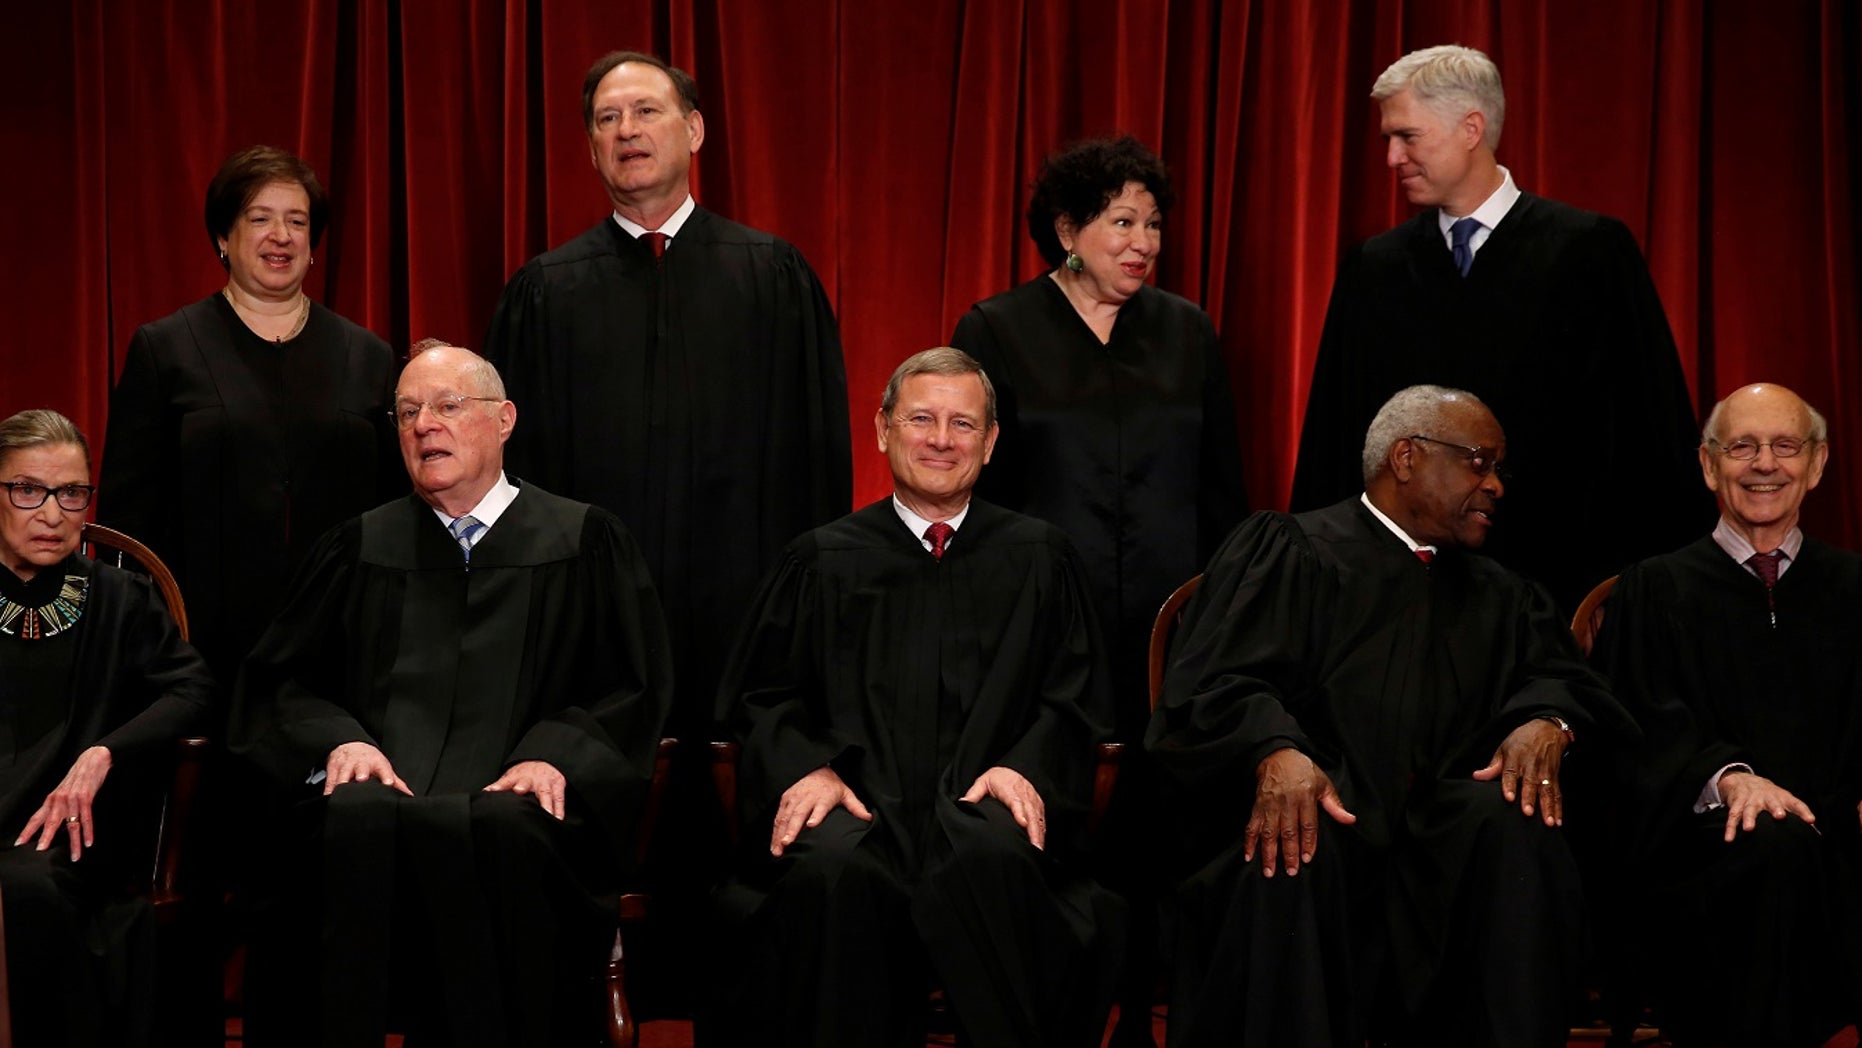 Picture Of Current Supreme Court Justices Supreme Court Justices